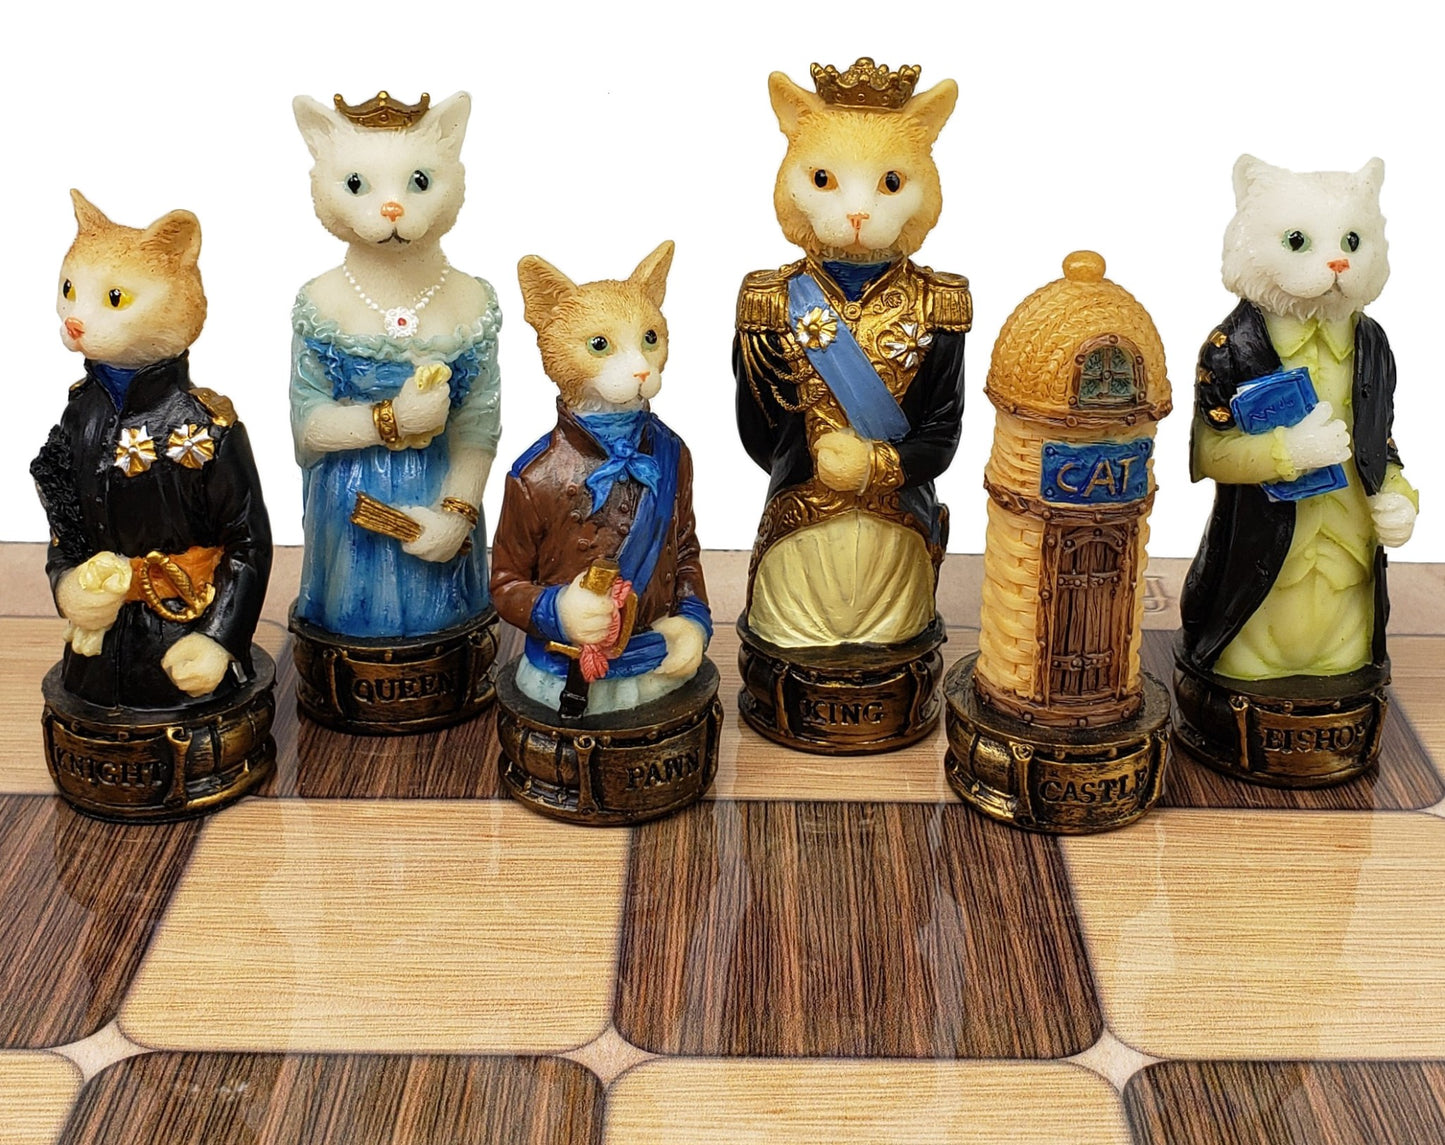 Cats Vs Dogs Animal Painted Chess Set With 17" Rustic Color Board